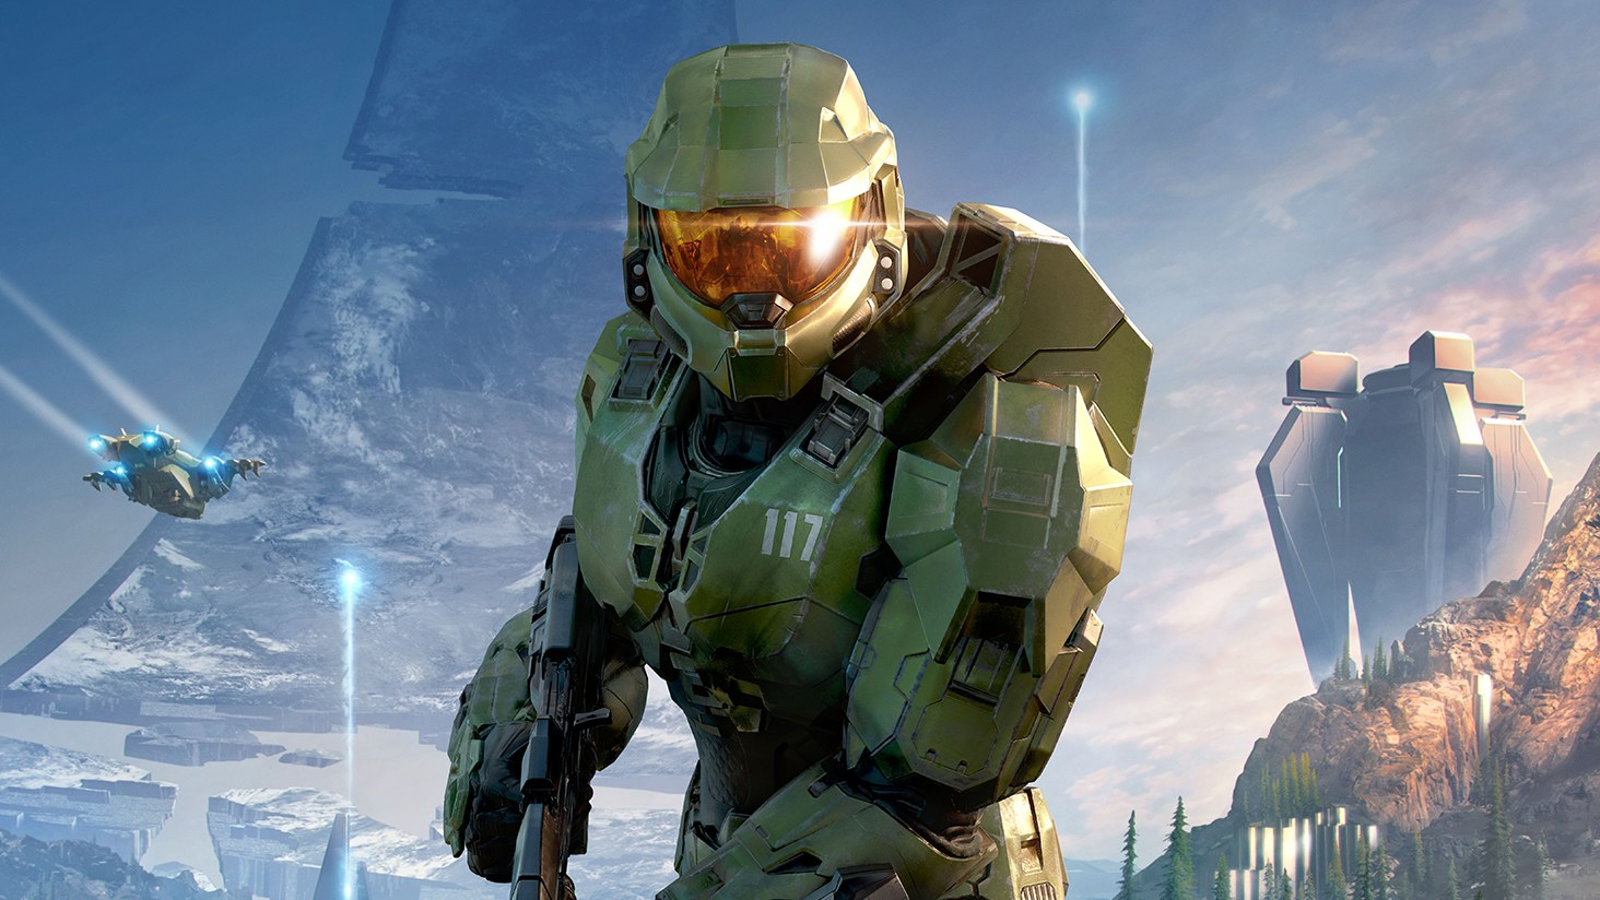 The Halo Infinite battle royale mode is here, just not from 343